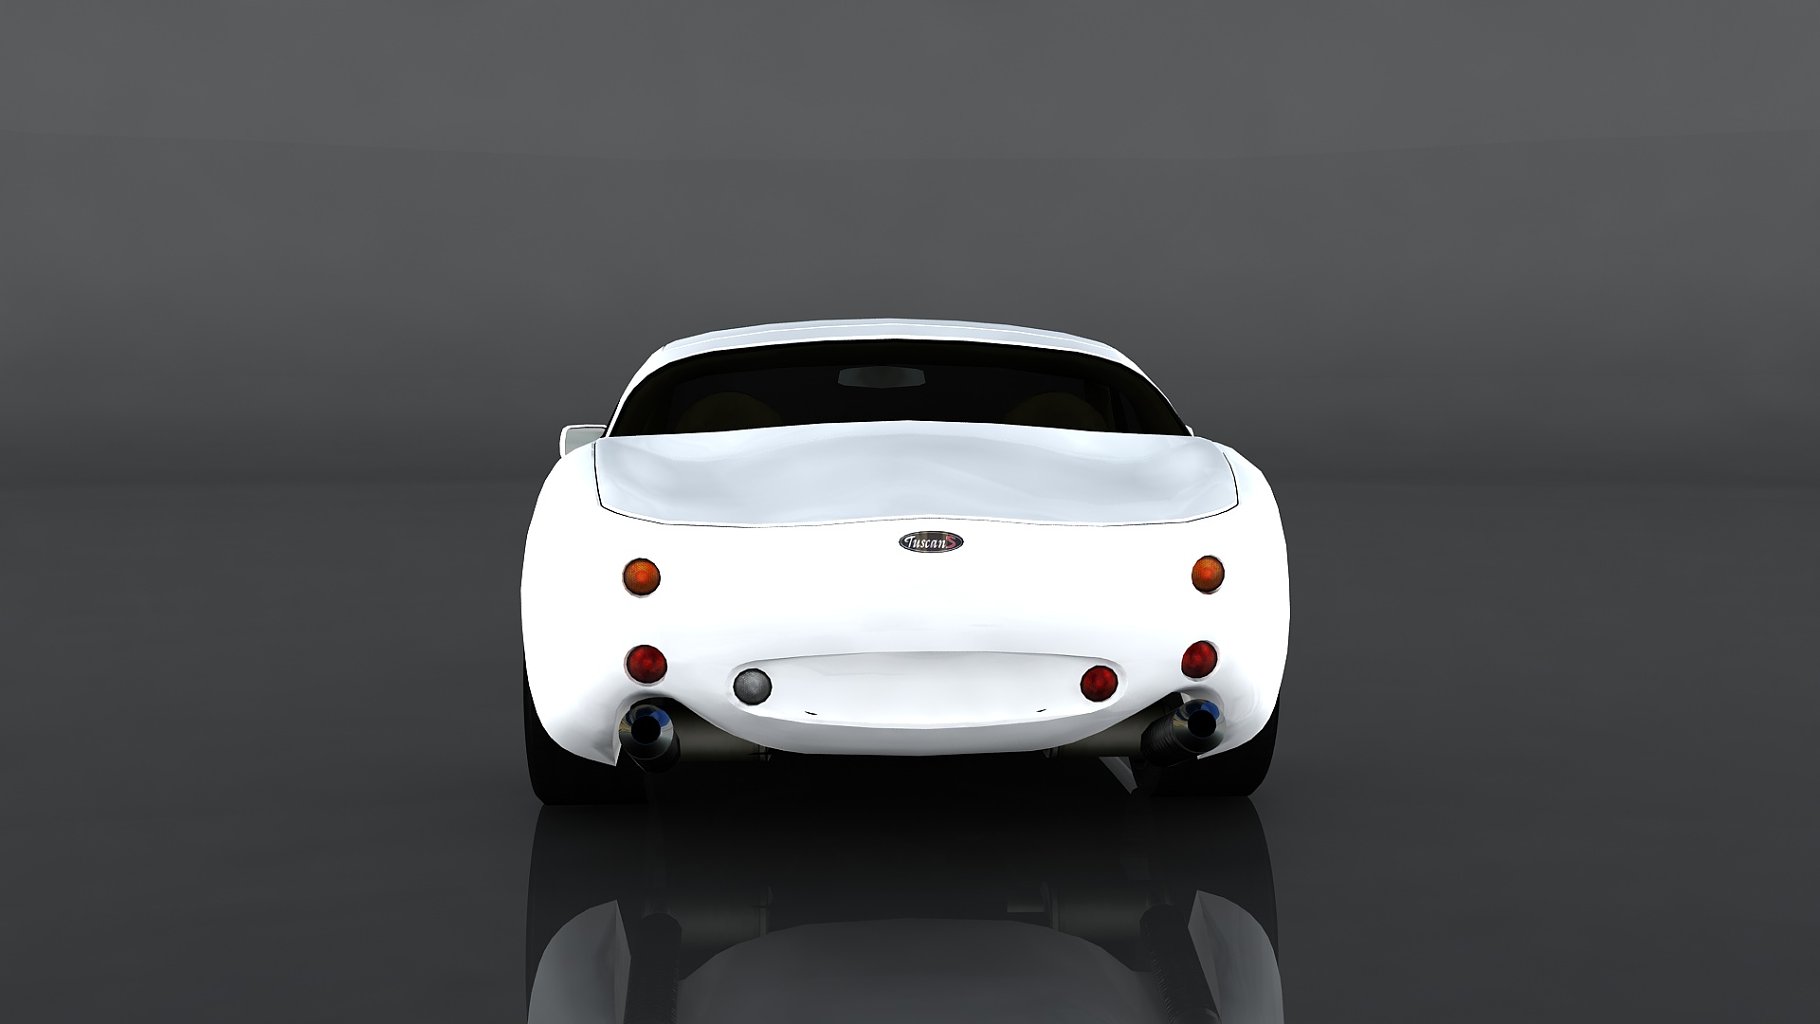 White back 2001 tvr tuscan s mockup on a dark gray background.